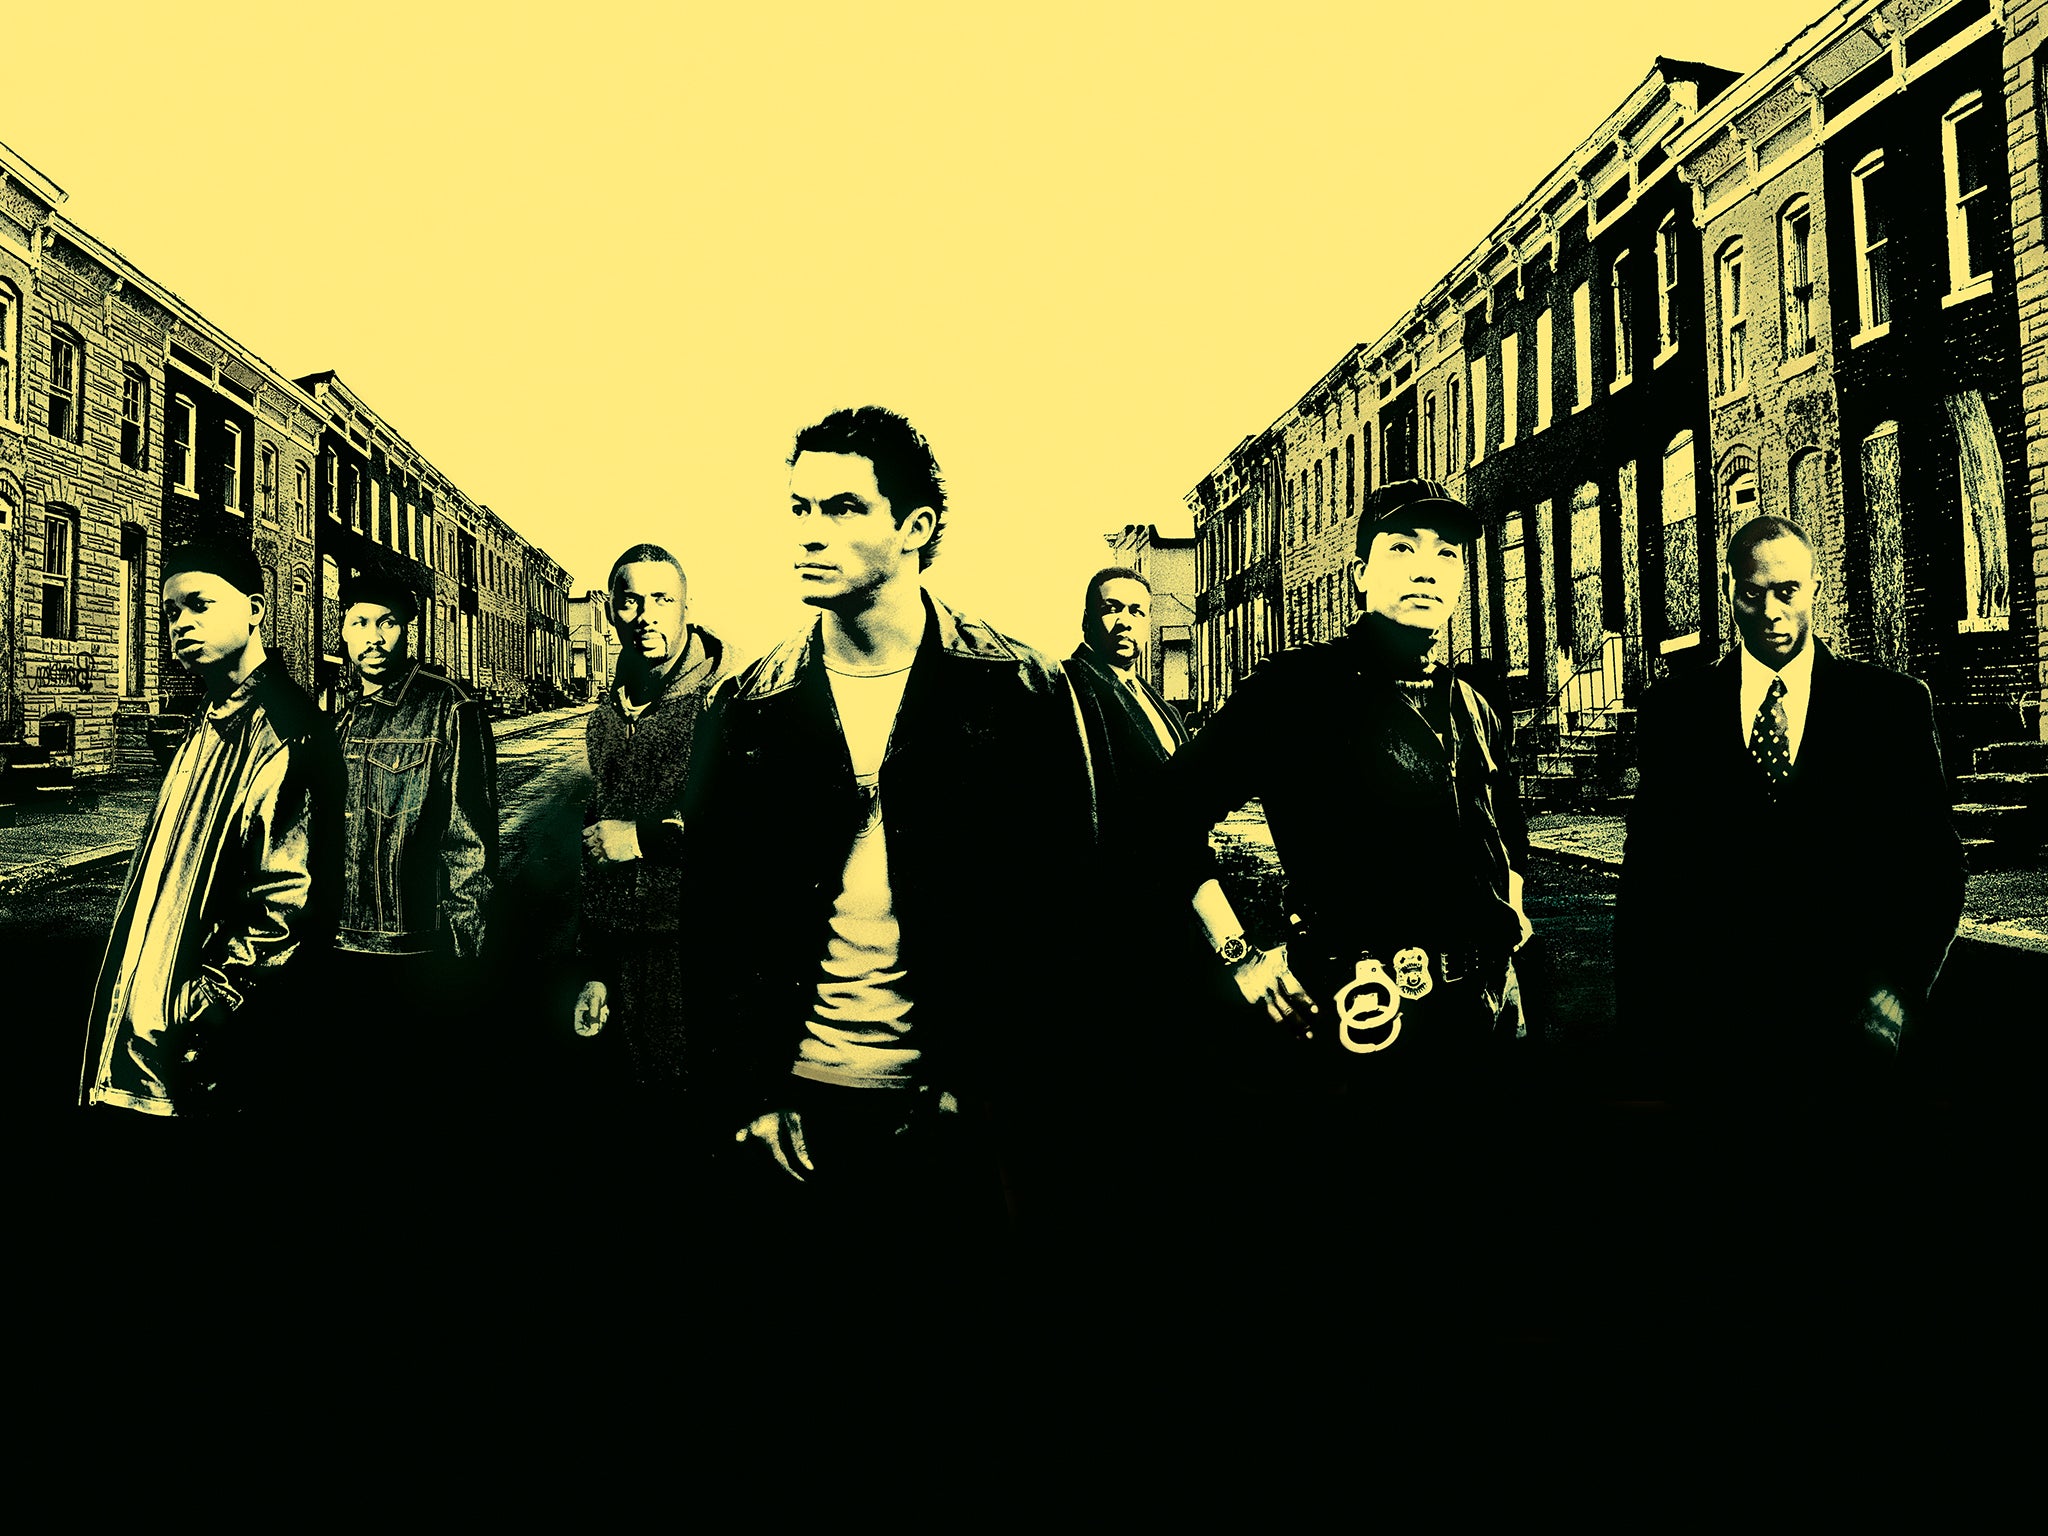 Reflections from the Cast and Creator of 'The Wire' 20 Years Later